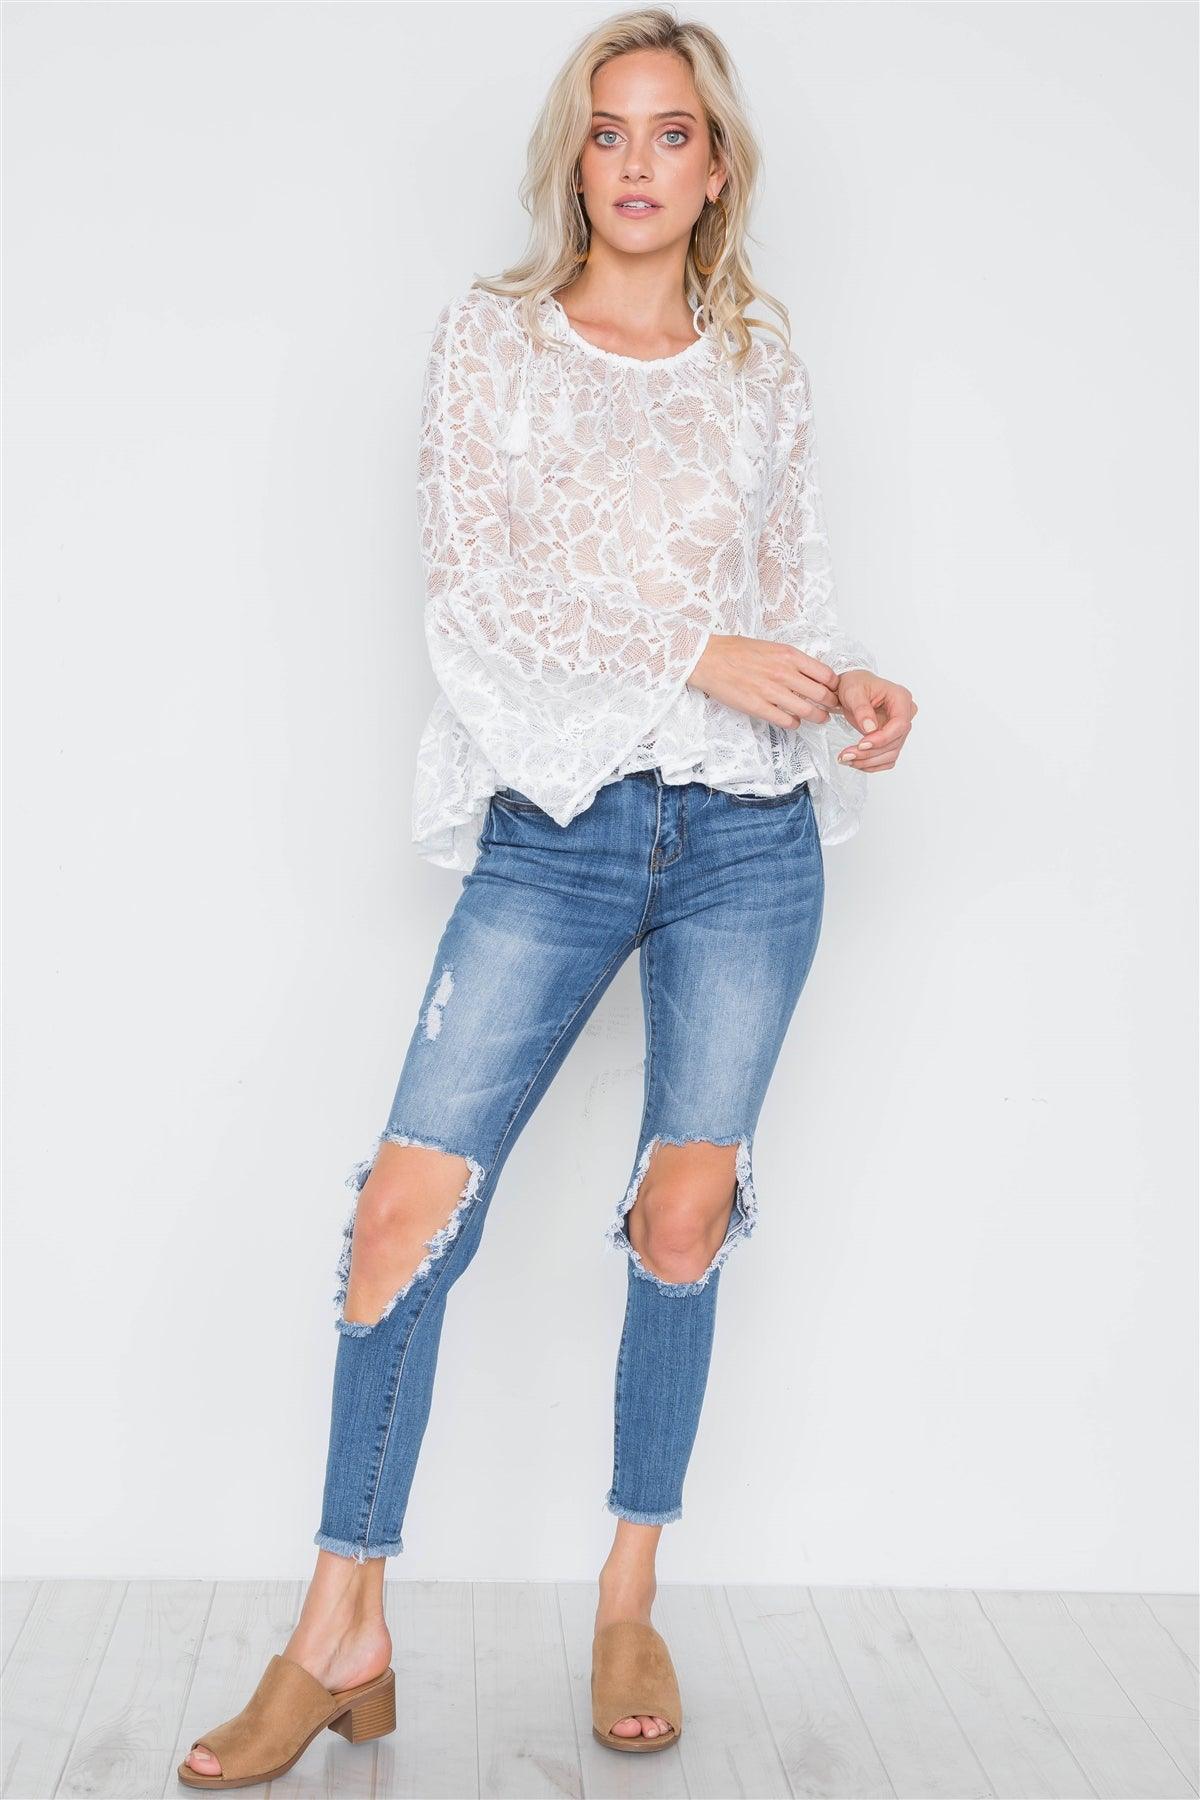 White Sheer Floral Lace Bell Sleeve Top /1-3-2-1